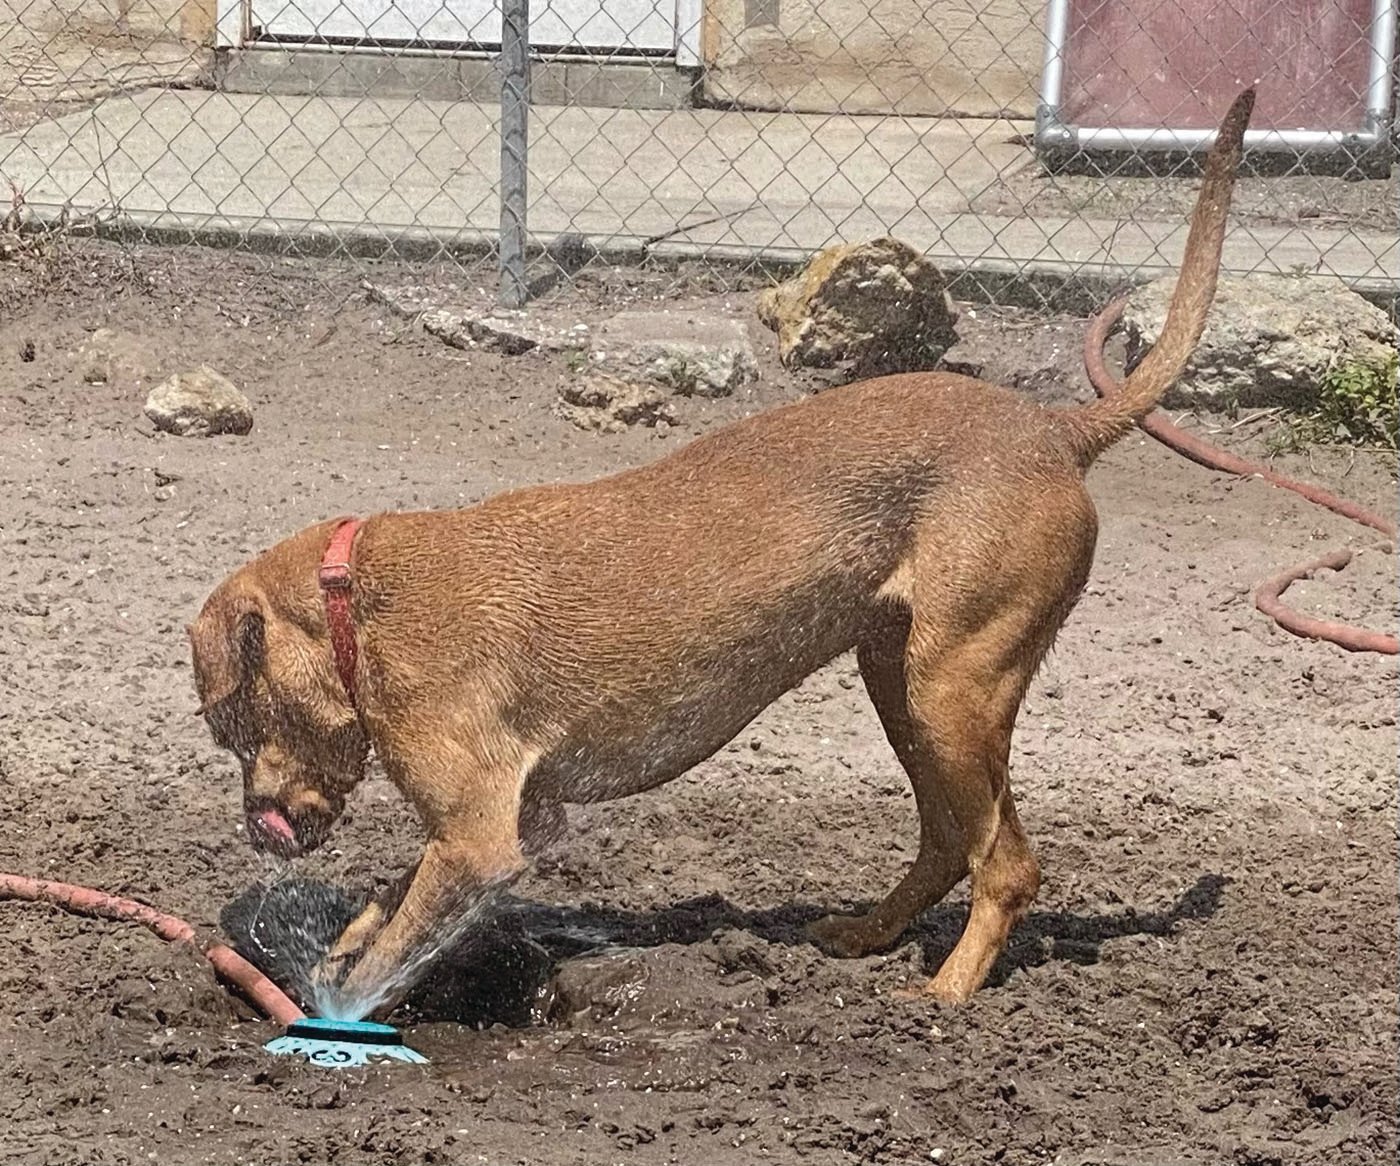 Need a partner for some Summer fun? Gunner is your guy! This big boy loves playing, especially when there’s water involved. Gunner is 1 year old.